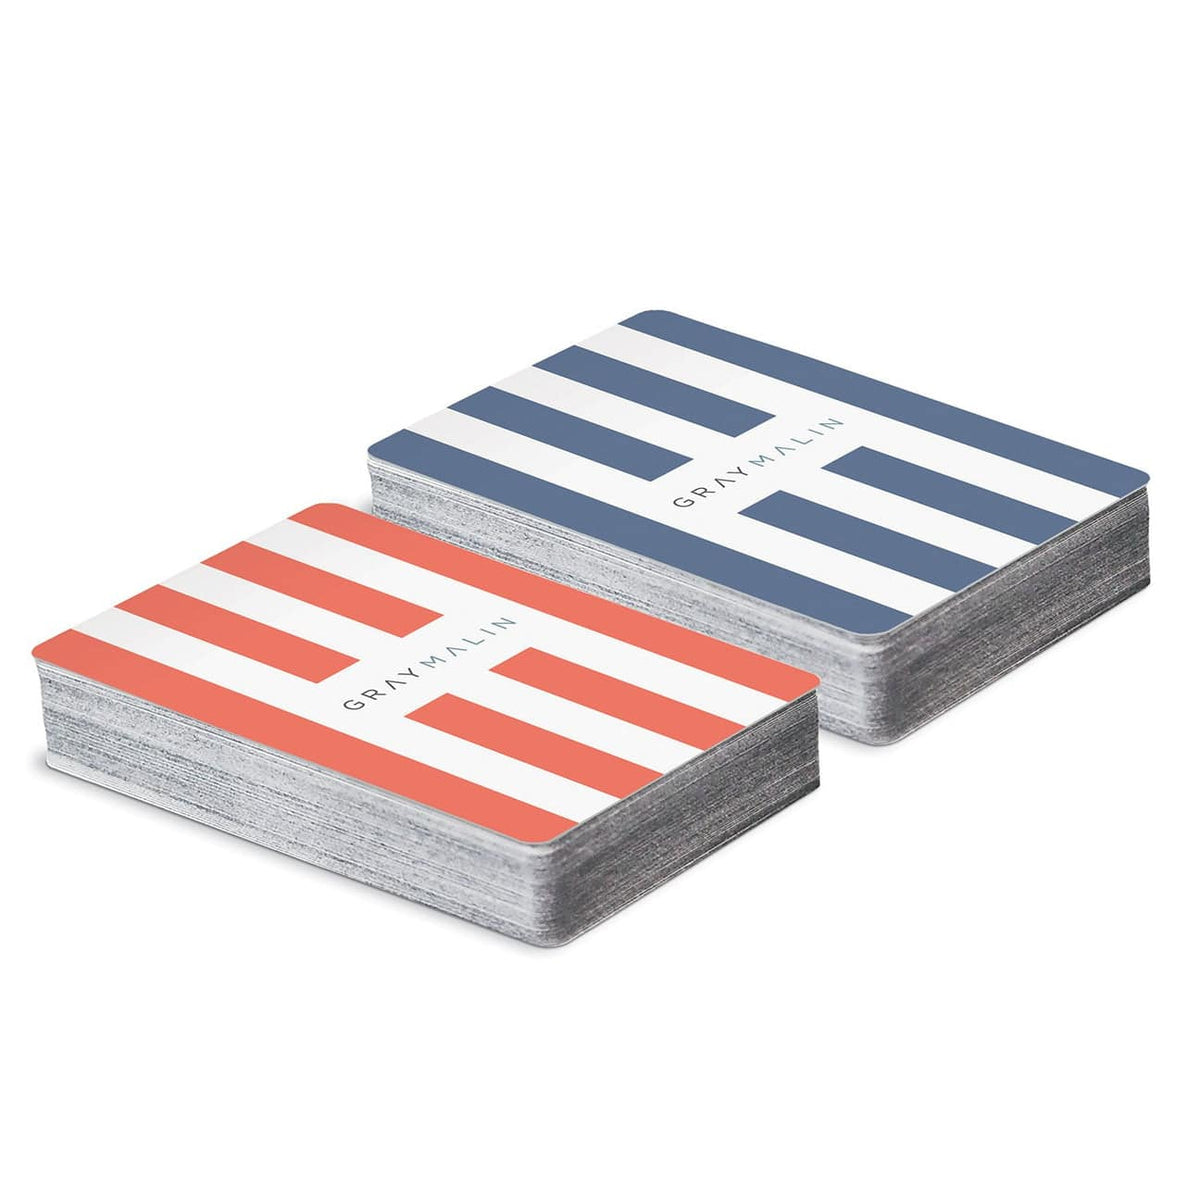 Gray Malin The Beach Playing Card Set - The Preppy Bunny